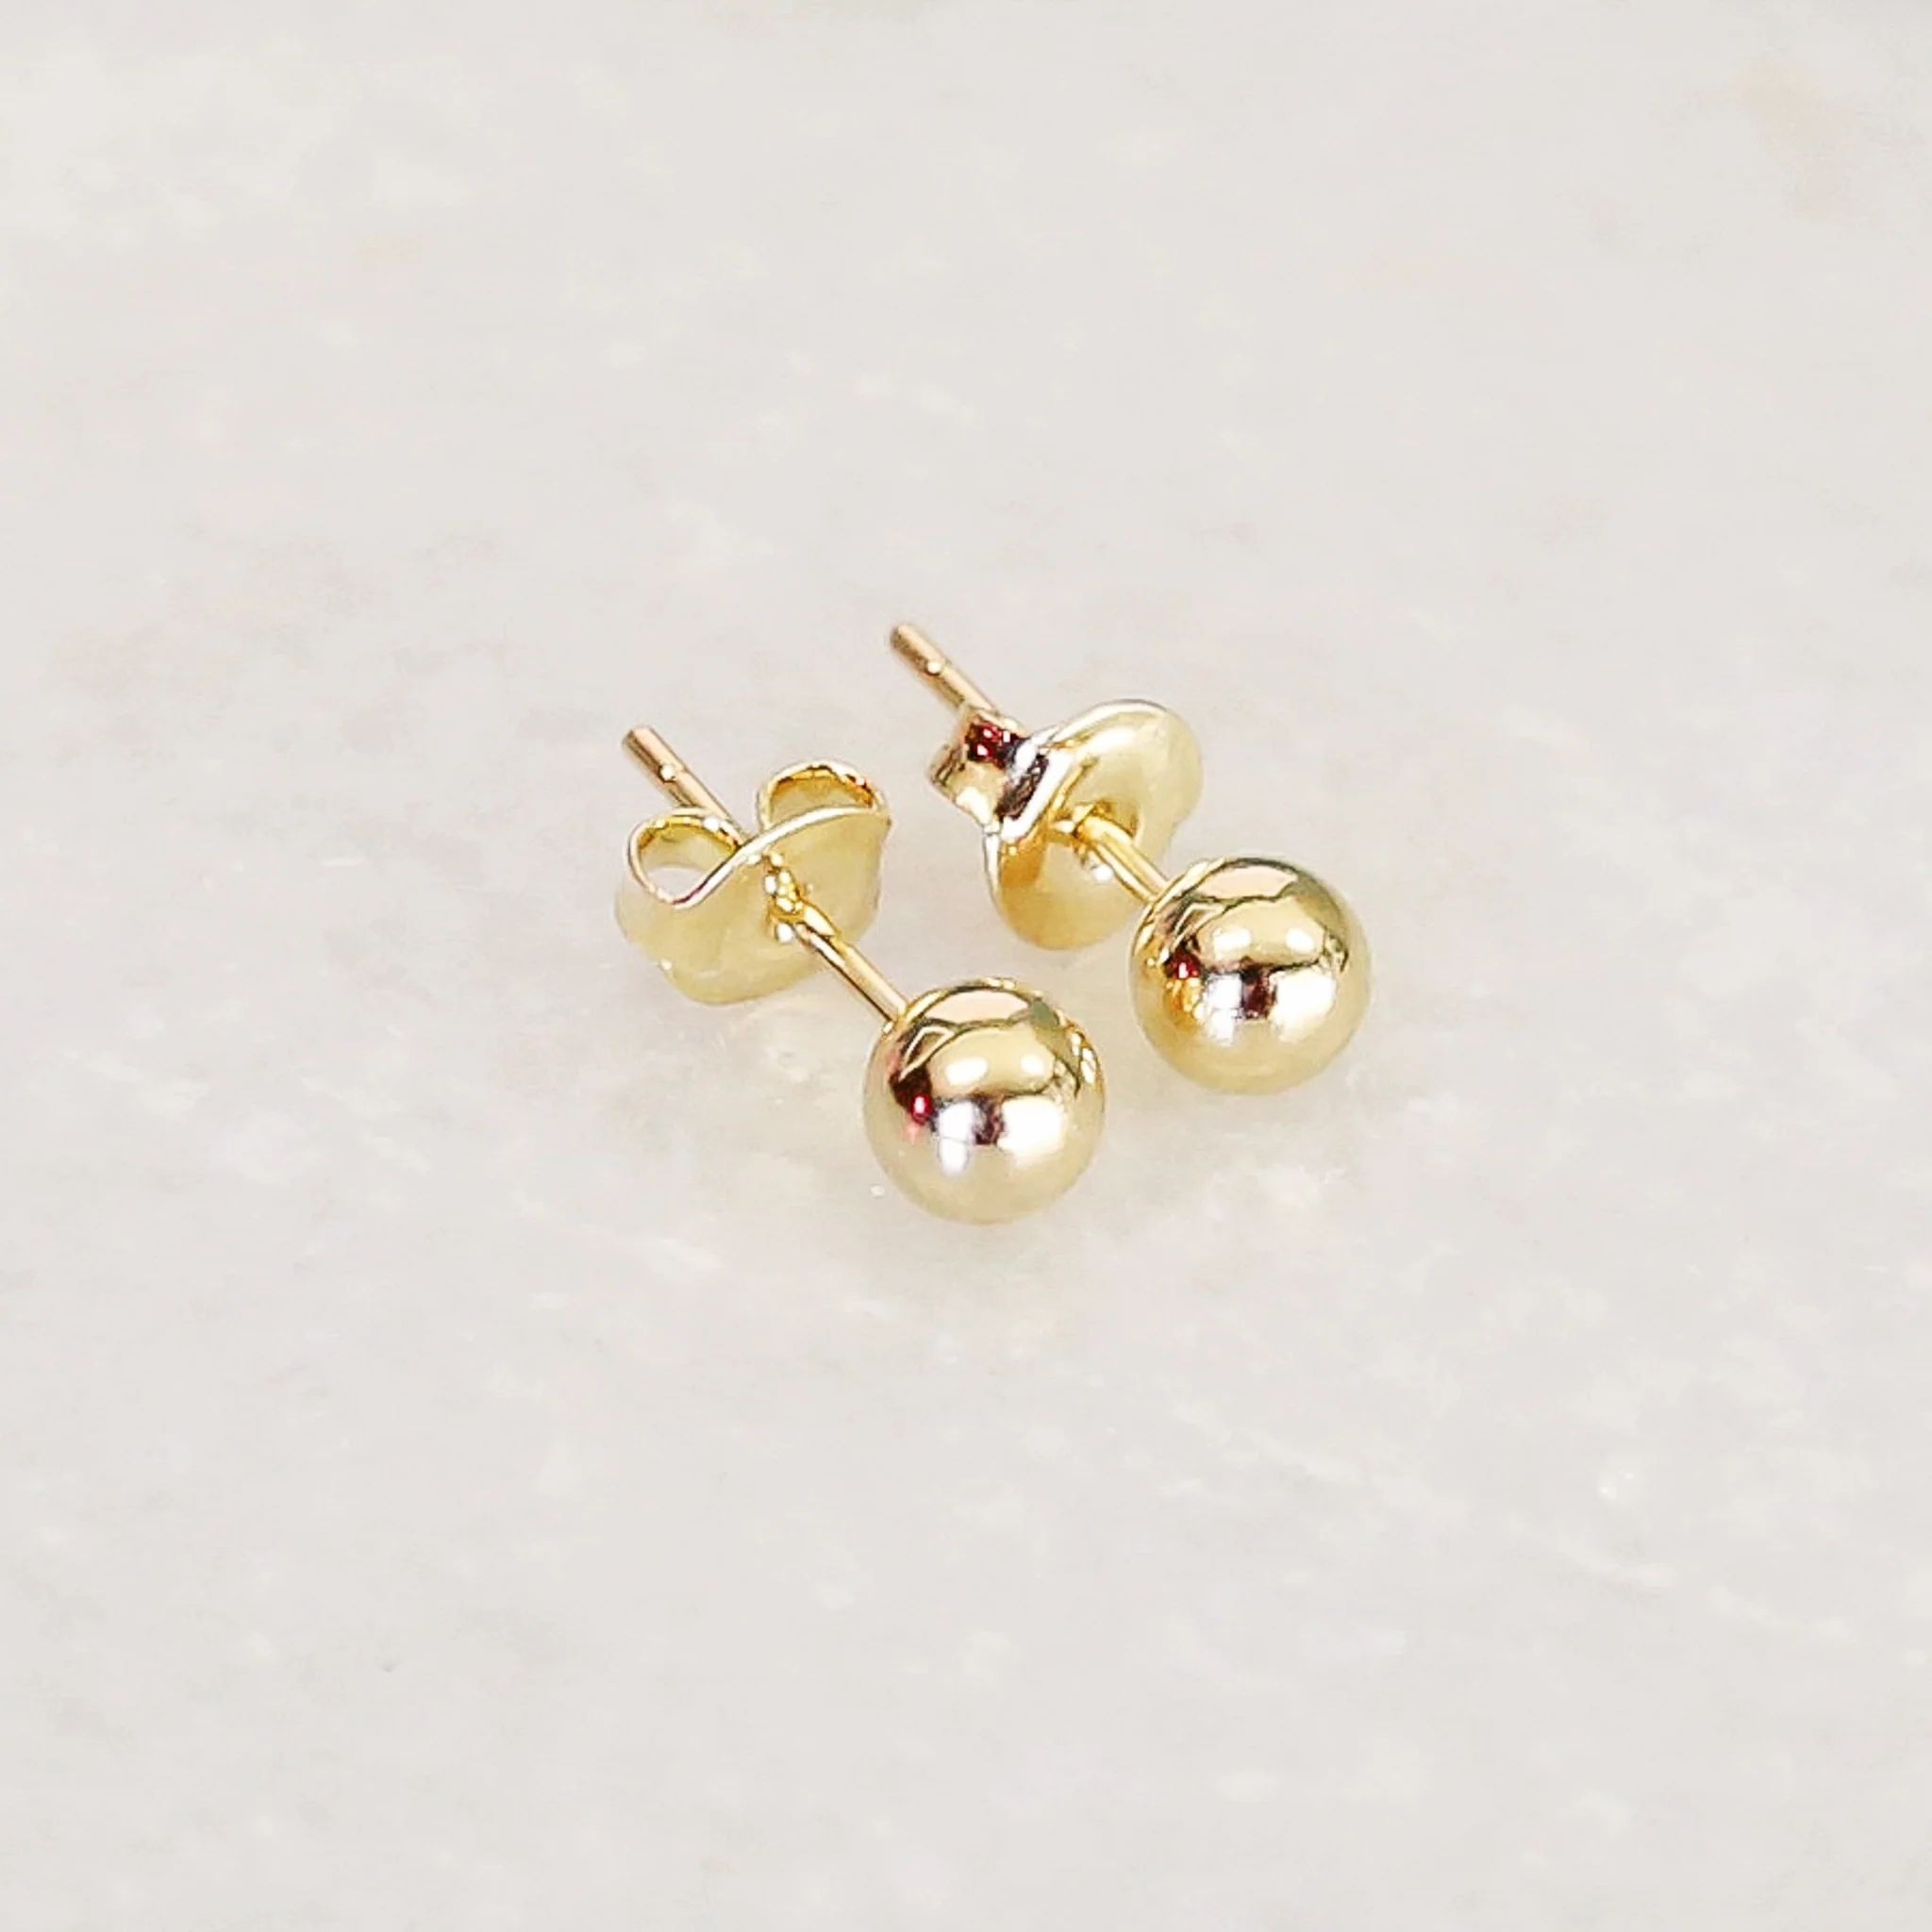 EXCLUSIVE OFFER - 5mm Gold Ball Earrings | Bowood Lane